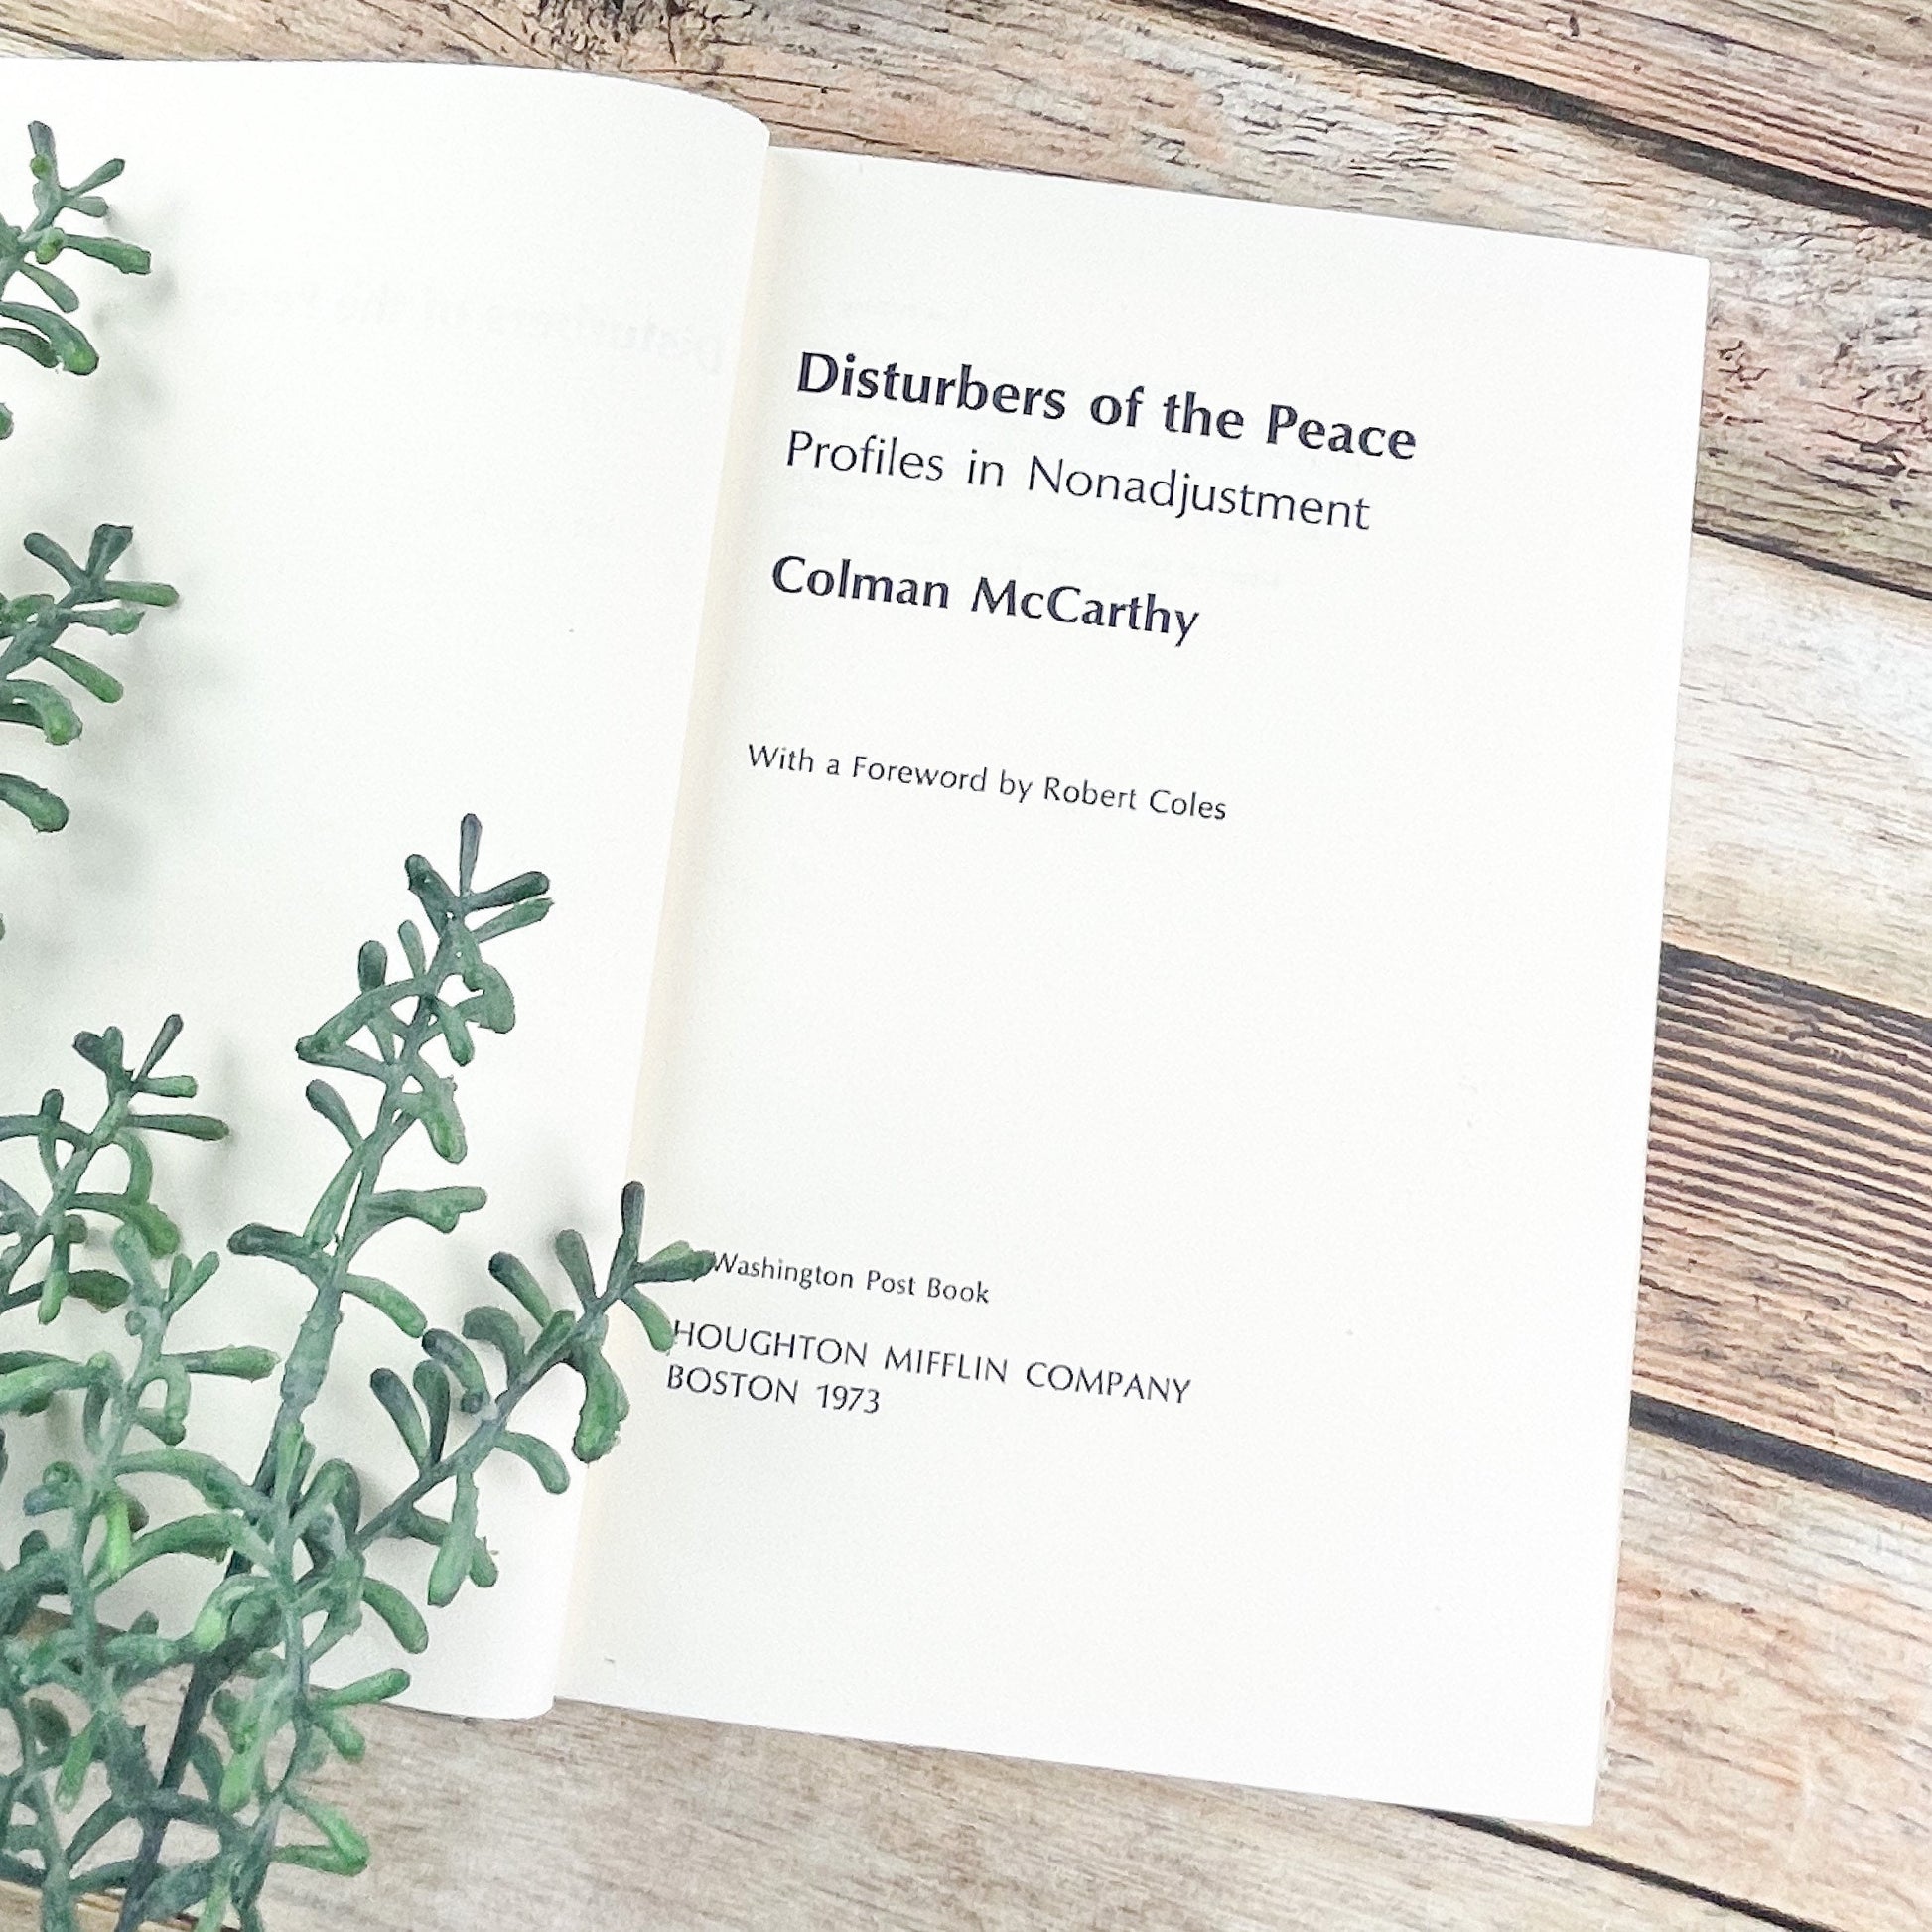 Signed by the Author, Disturbers of the Peace by Colman McCarthy